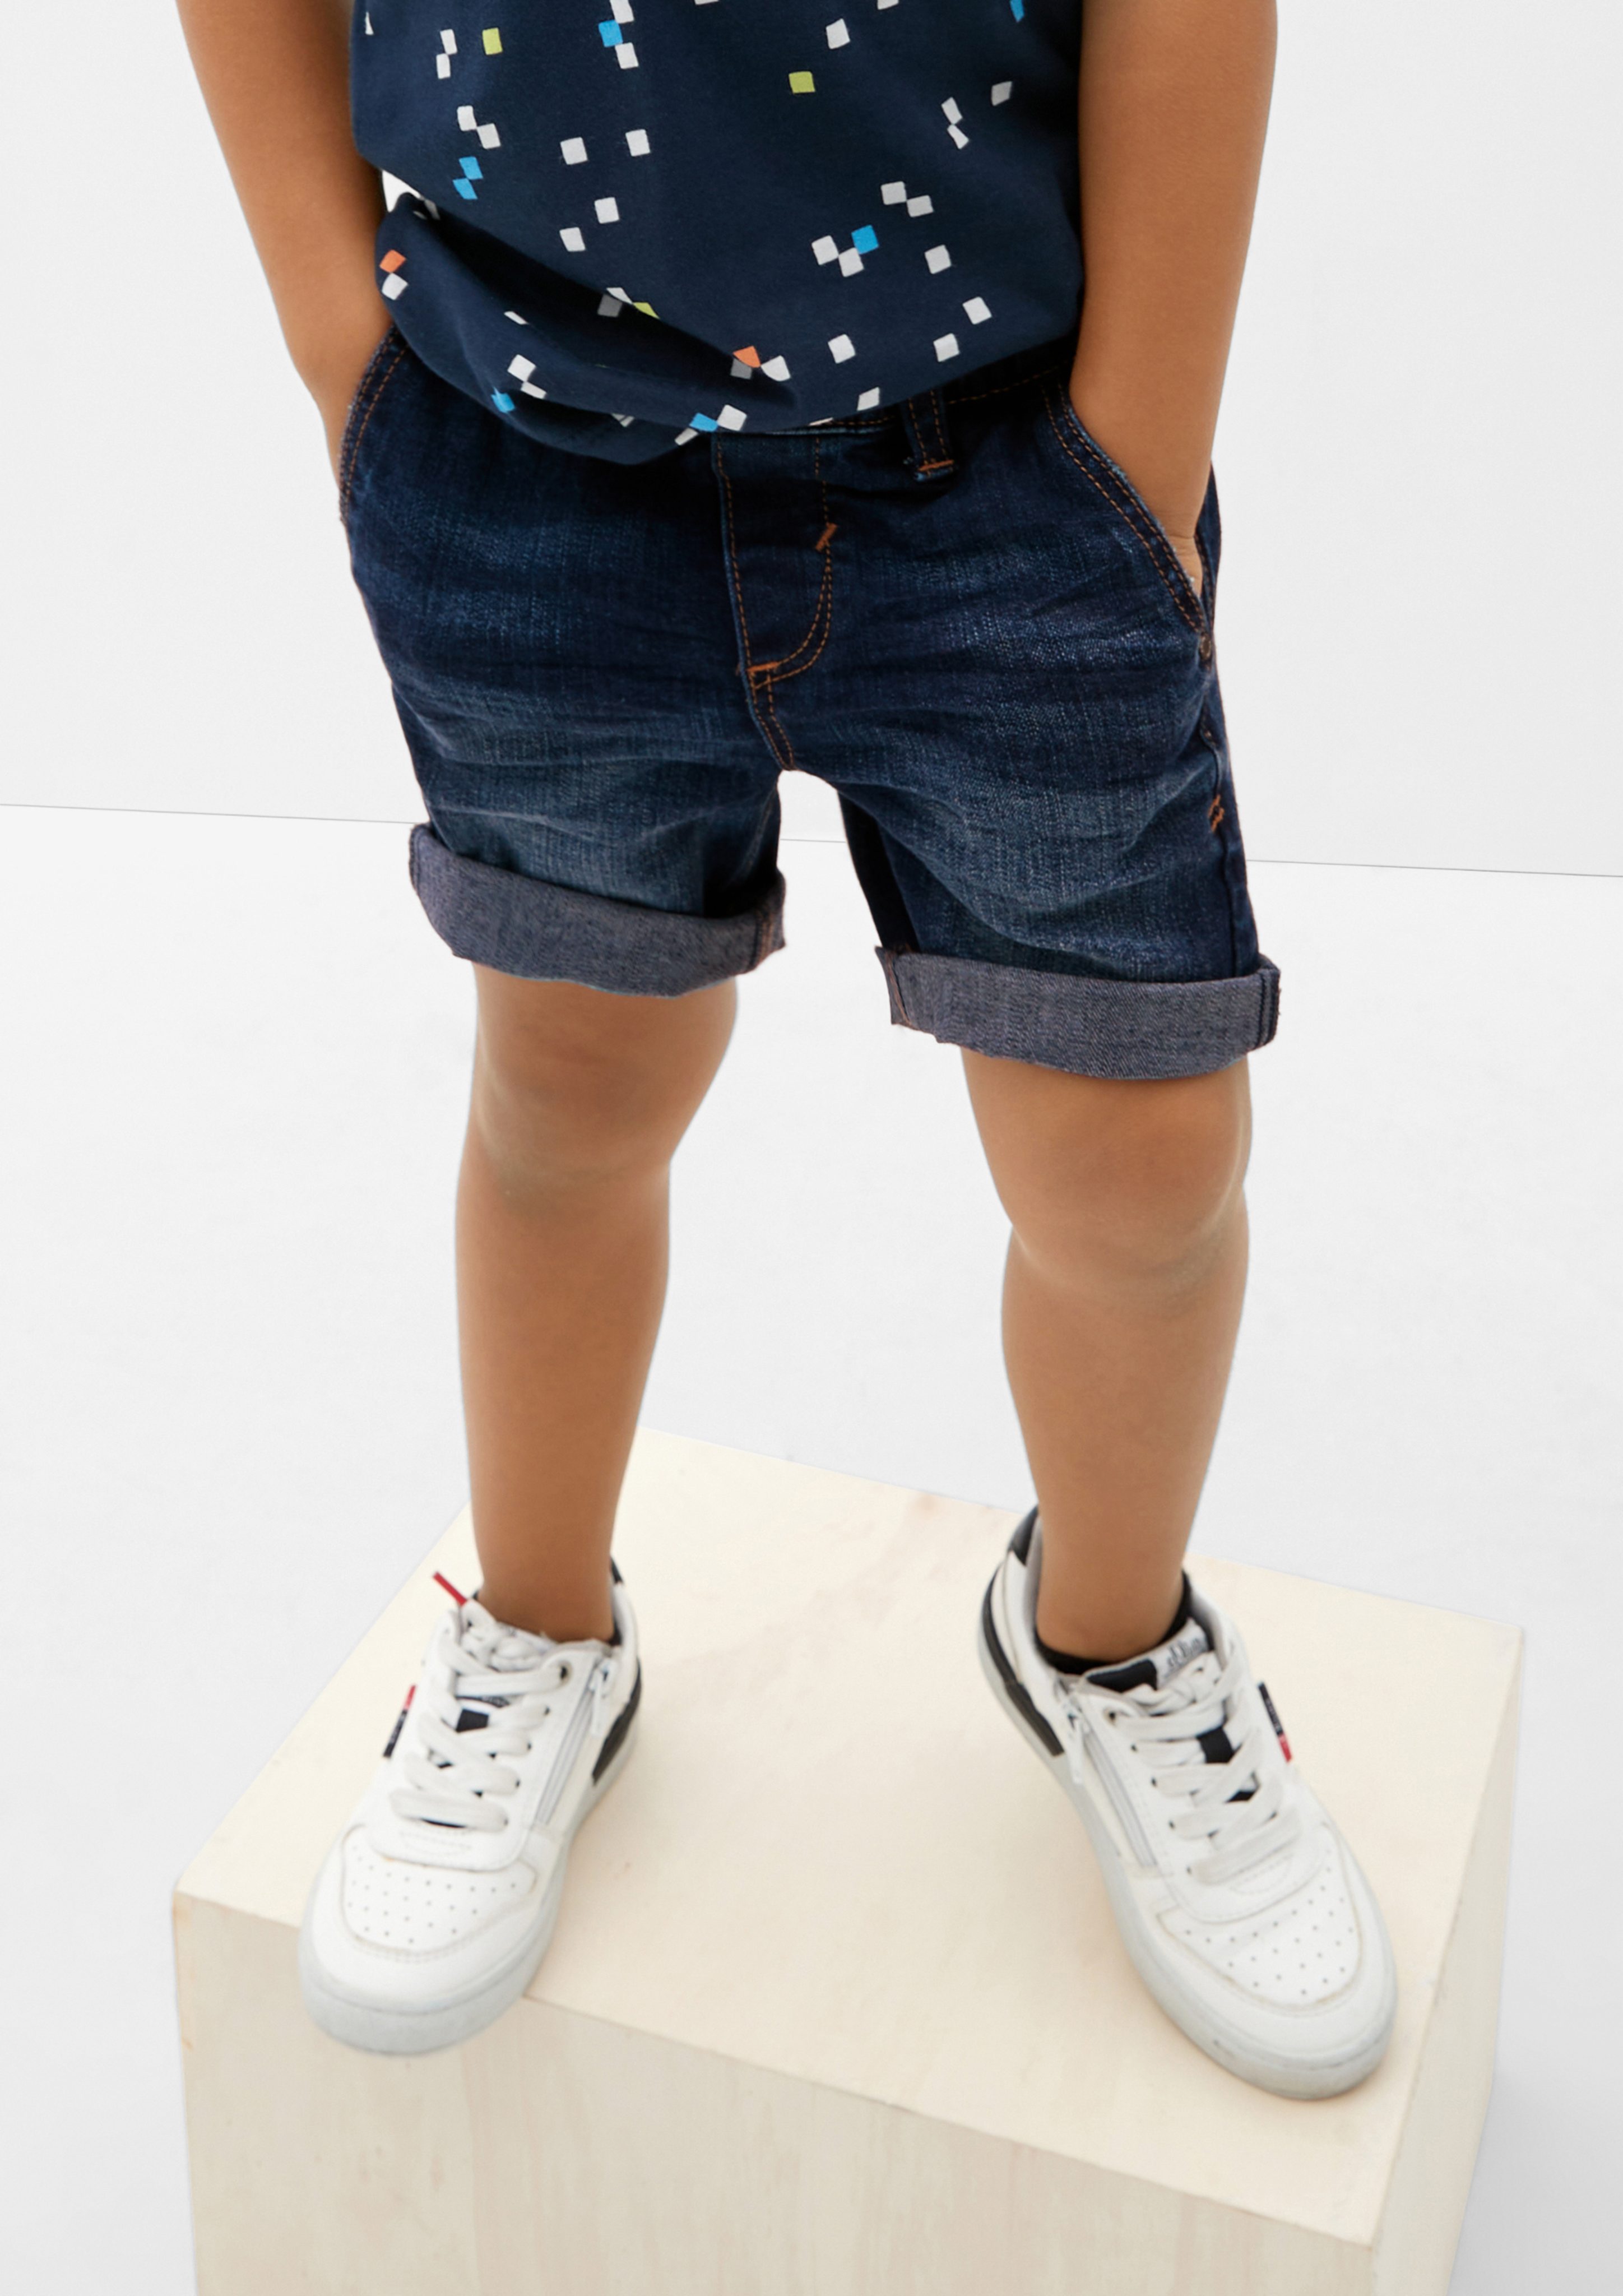 Straight Pelle / Jeansshorts Jeans Fit Mid Rise s.Oliver Leg / Waschung / Regular